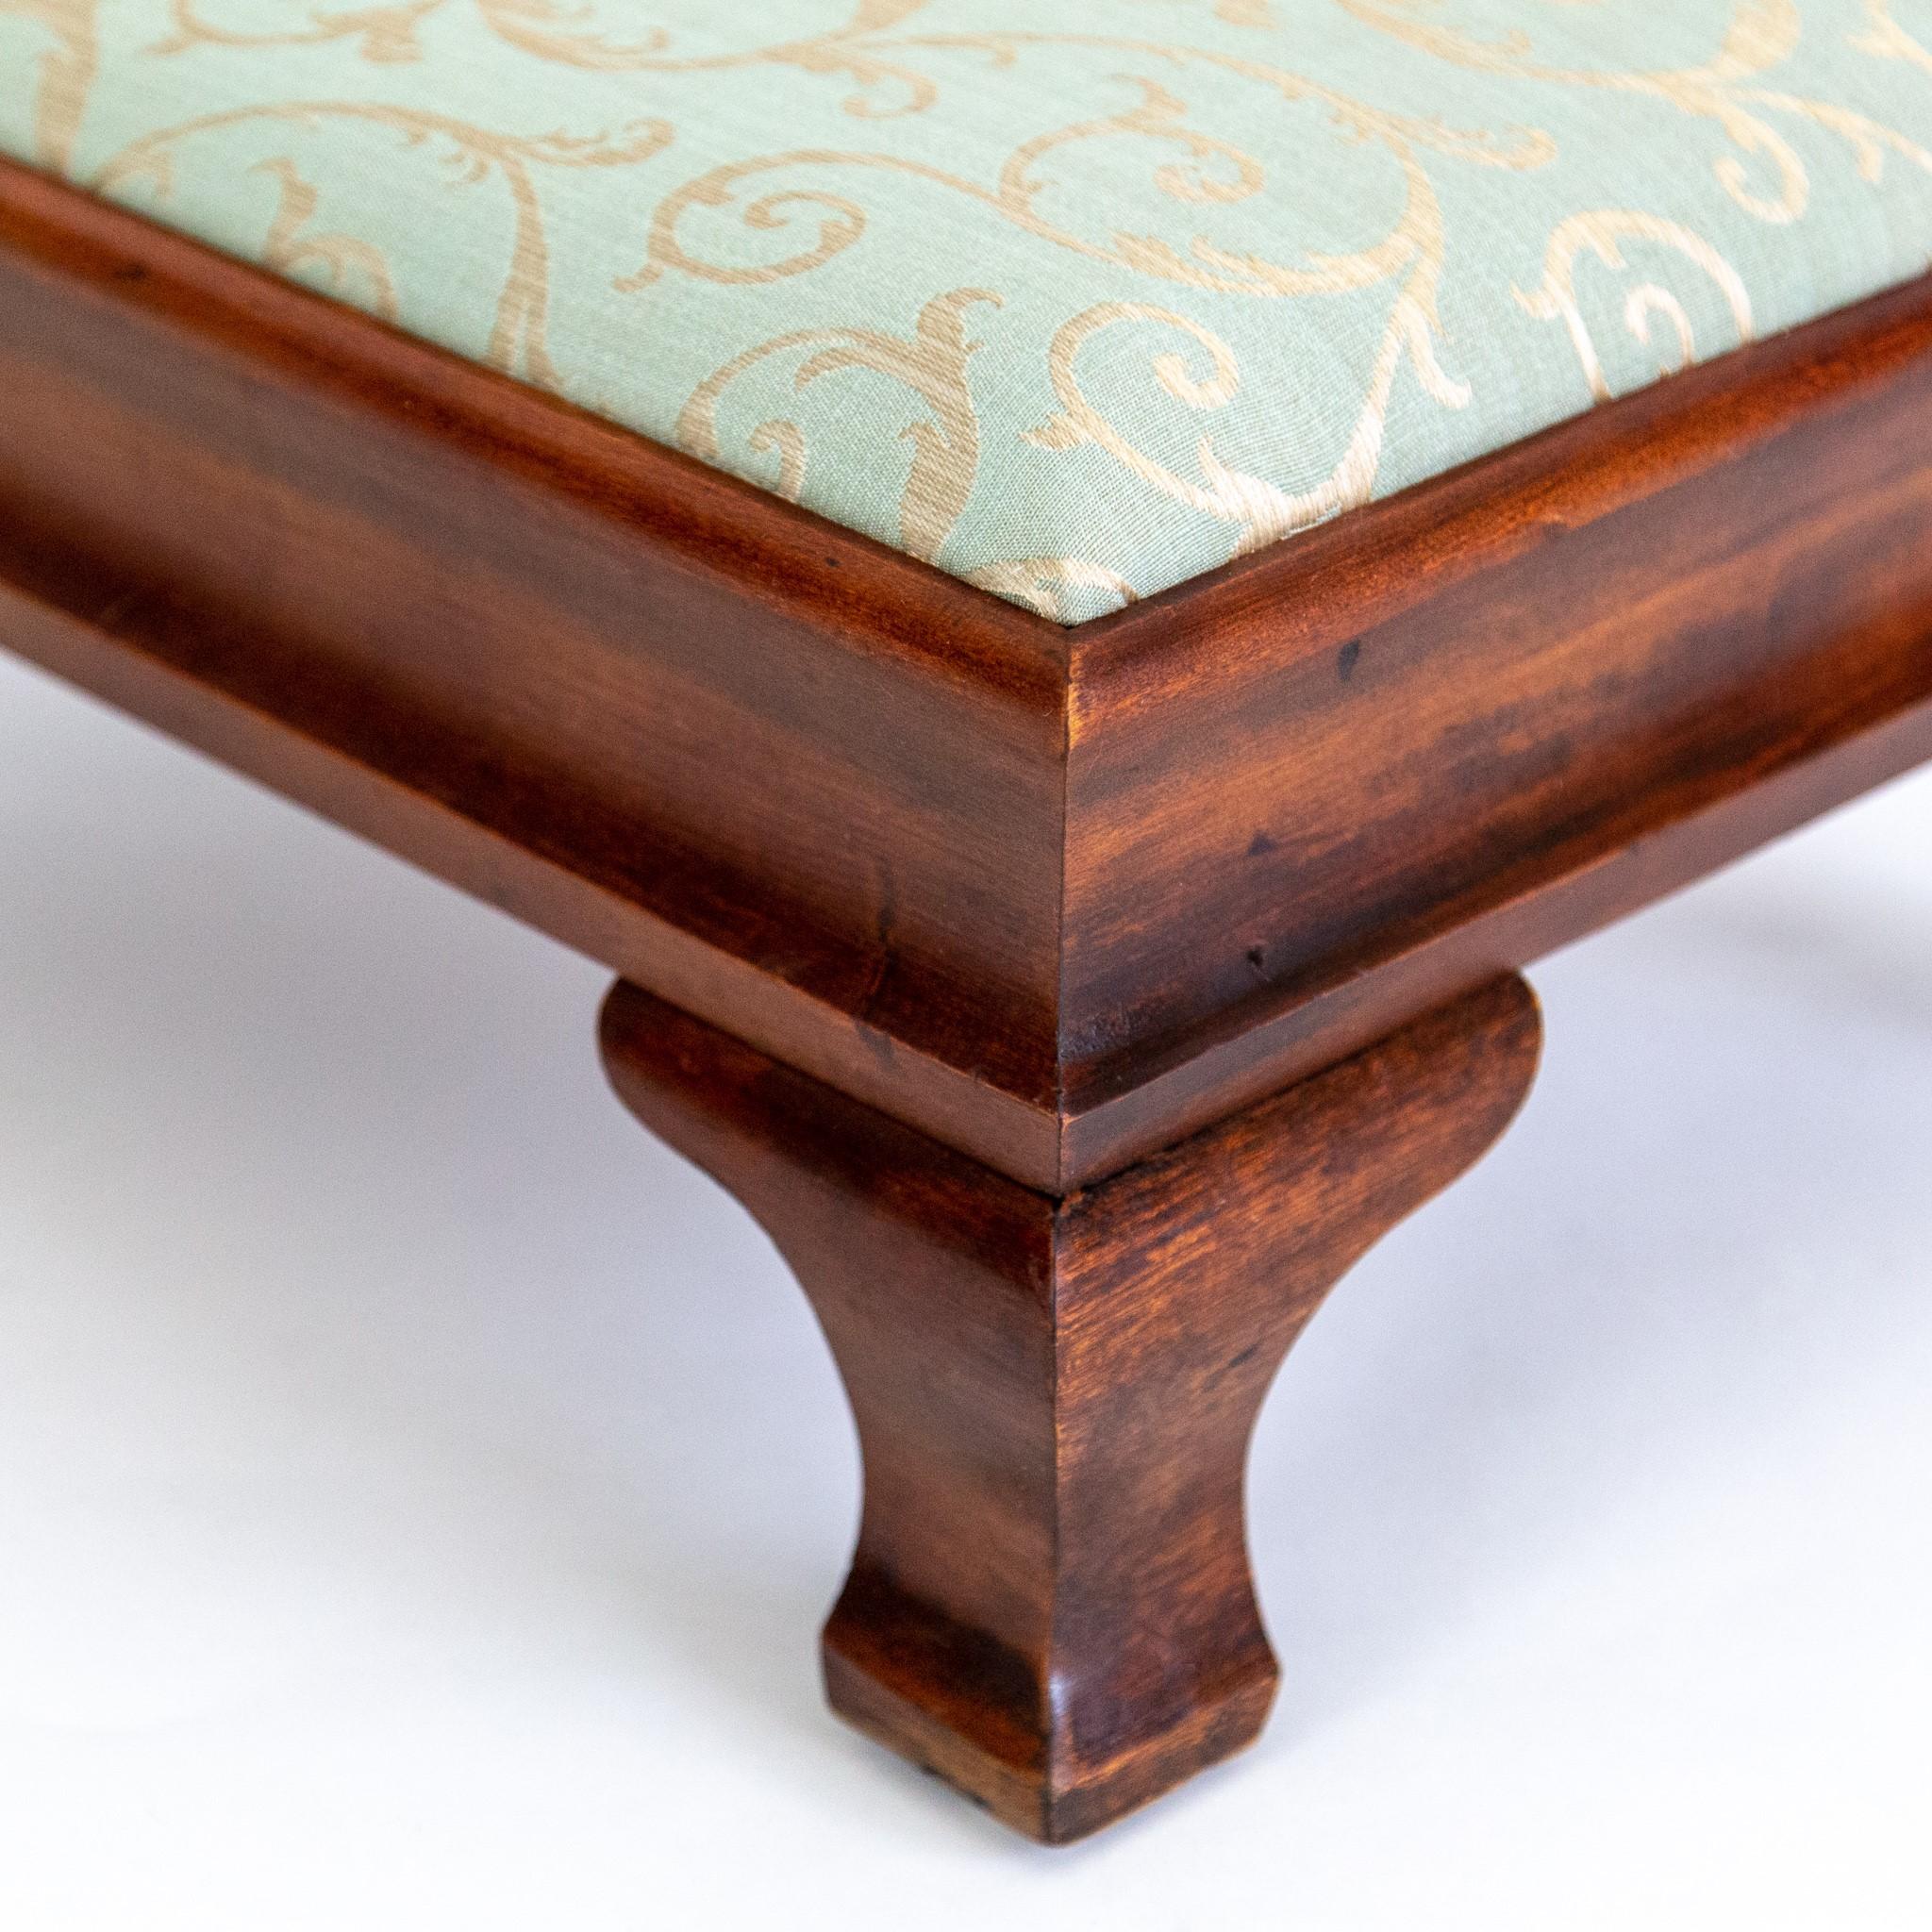 Walnut Footstool with Bracket Feet and Green Upholstery im Zustand „Gut“ in Baltimore, MD